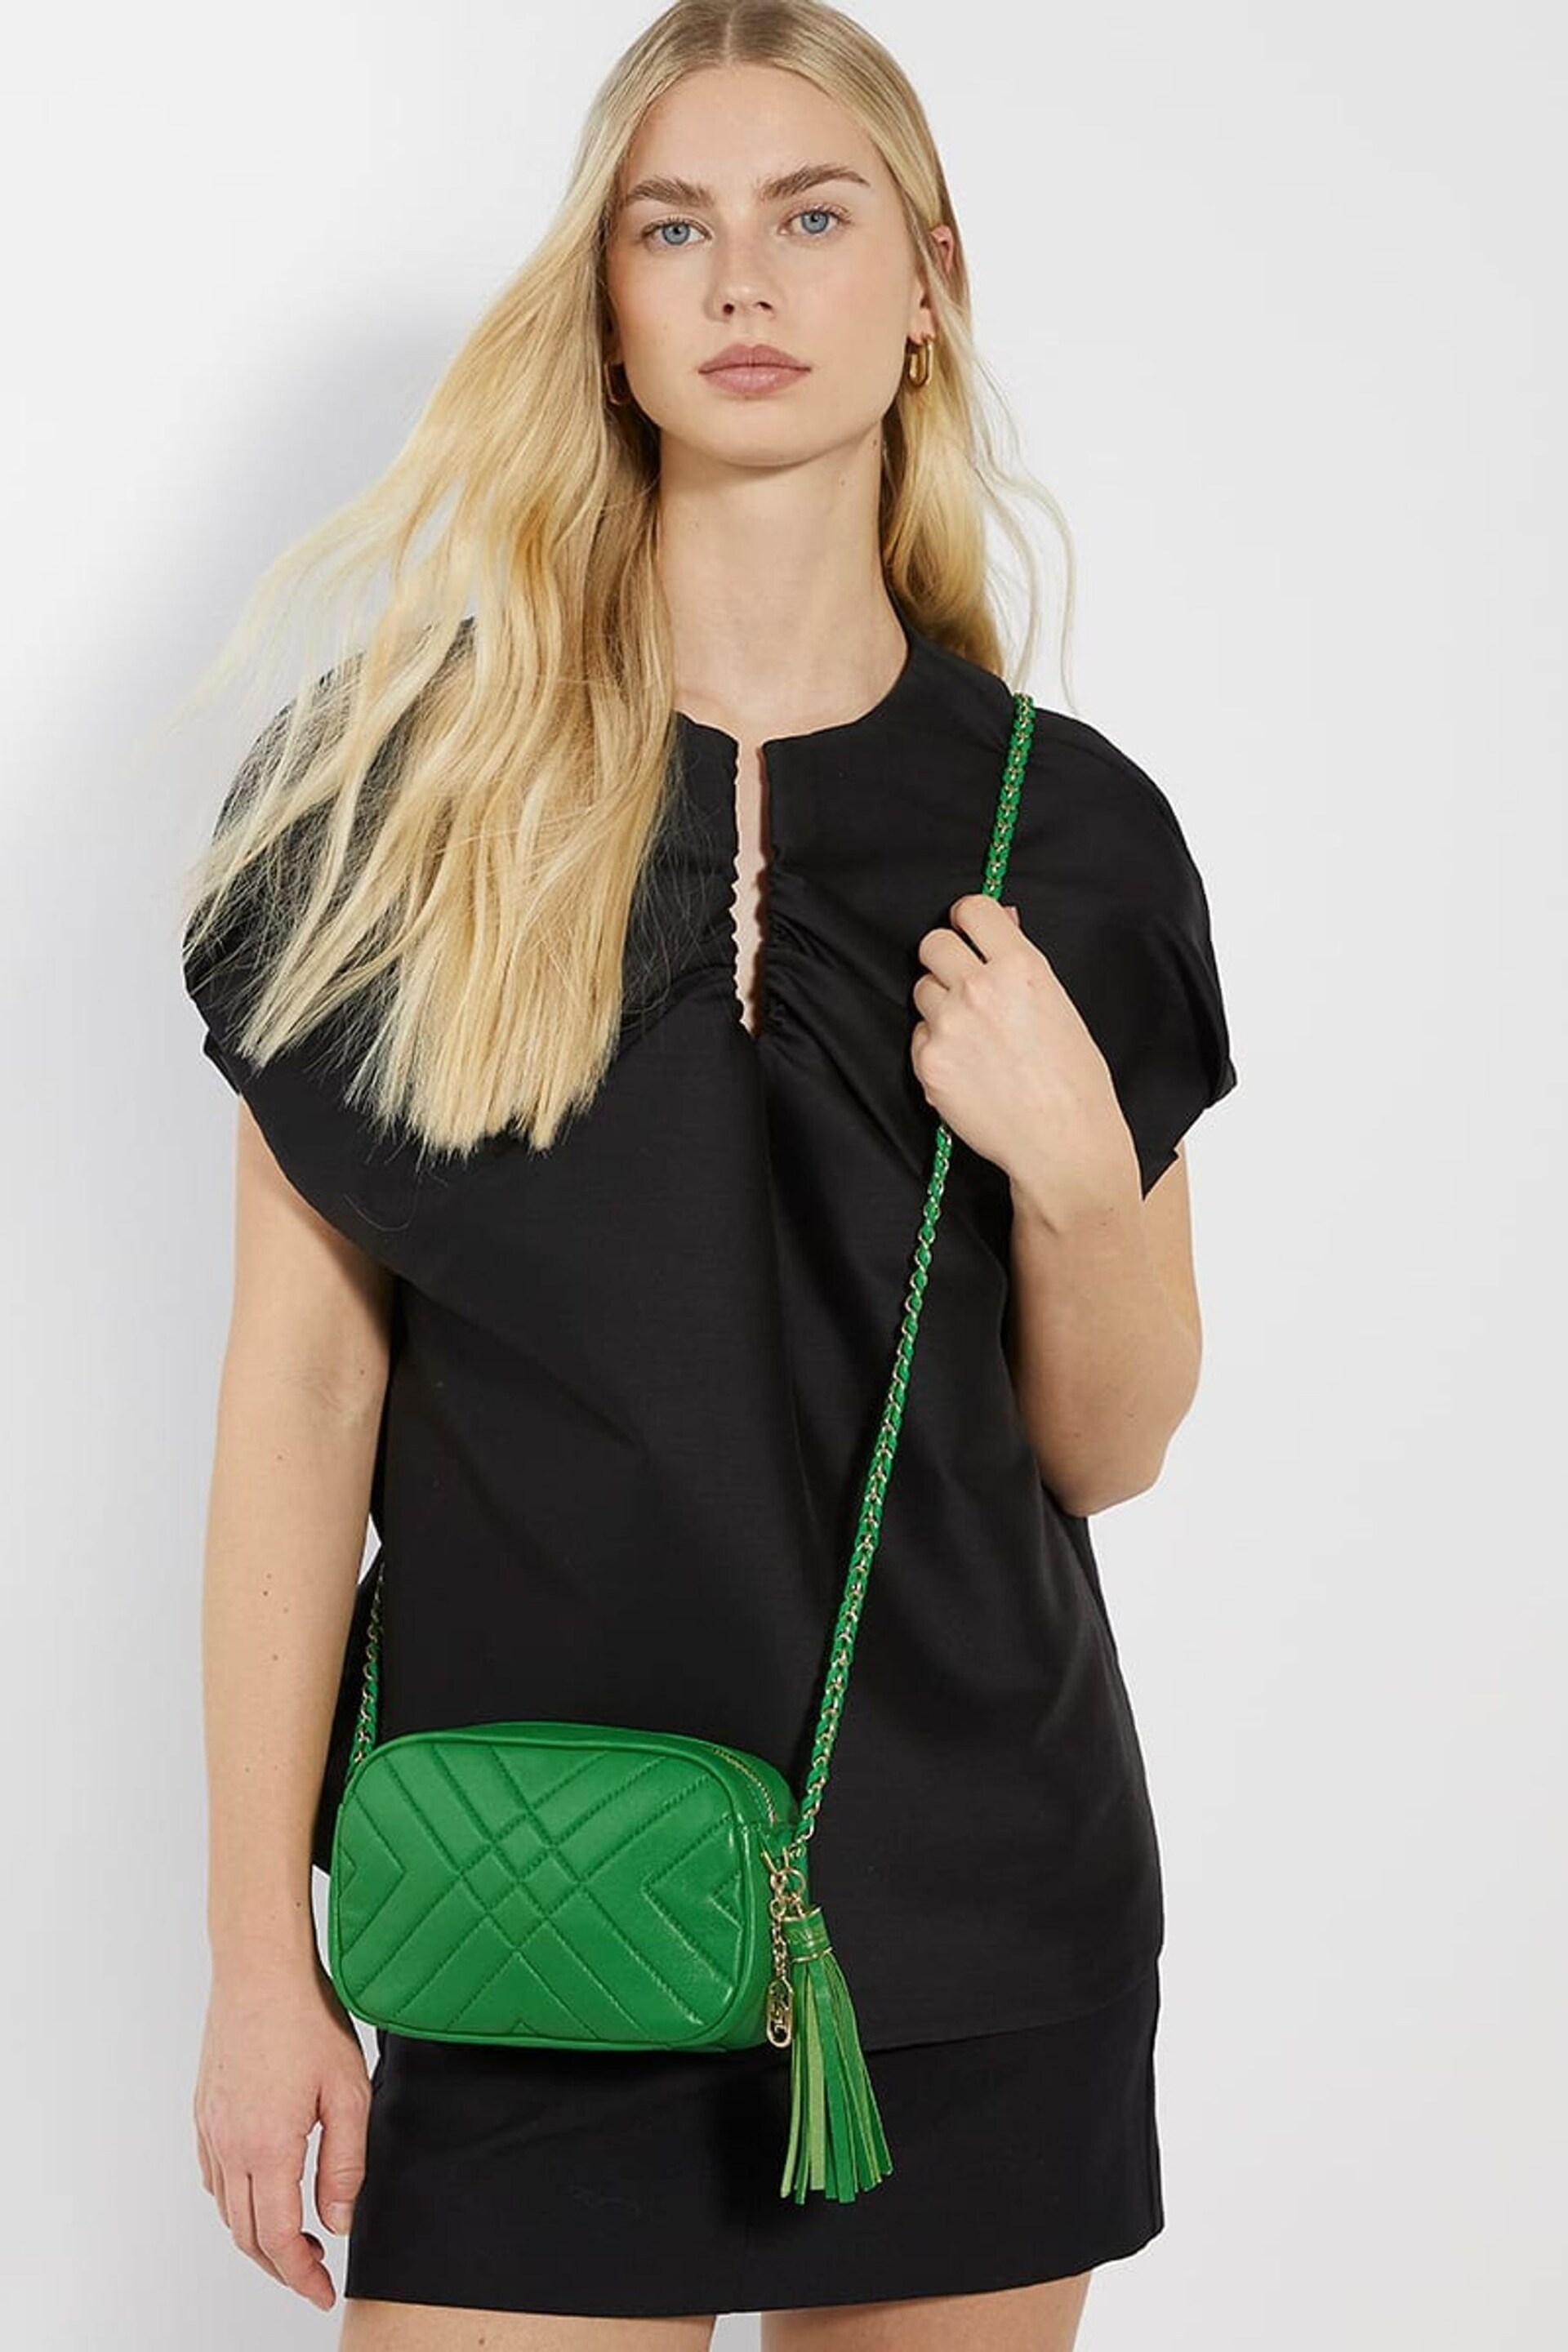 Dune London Green Chancery Small Leather Cross-Body Bag - Image 1 of 9